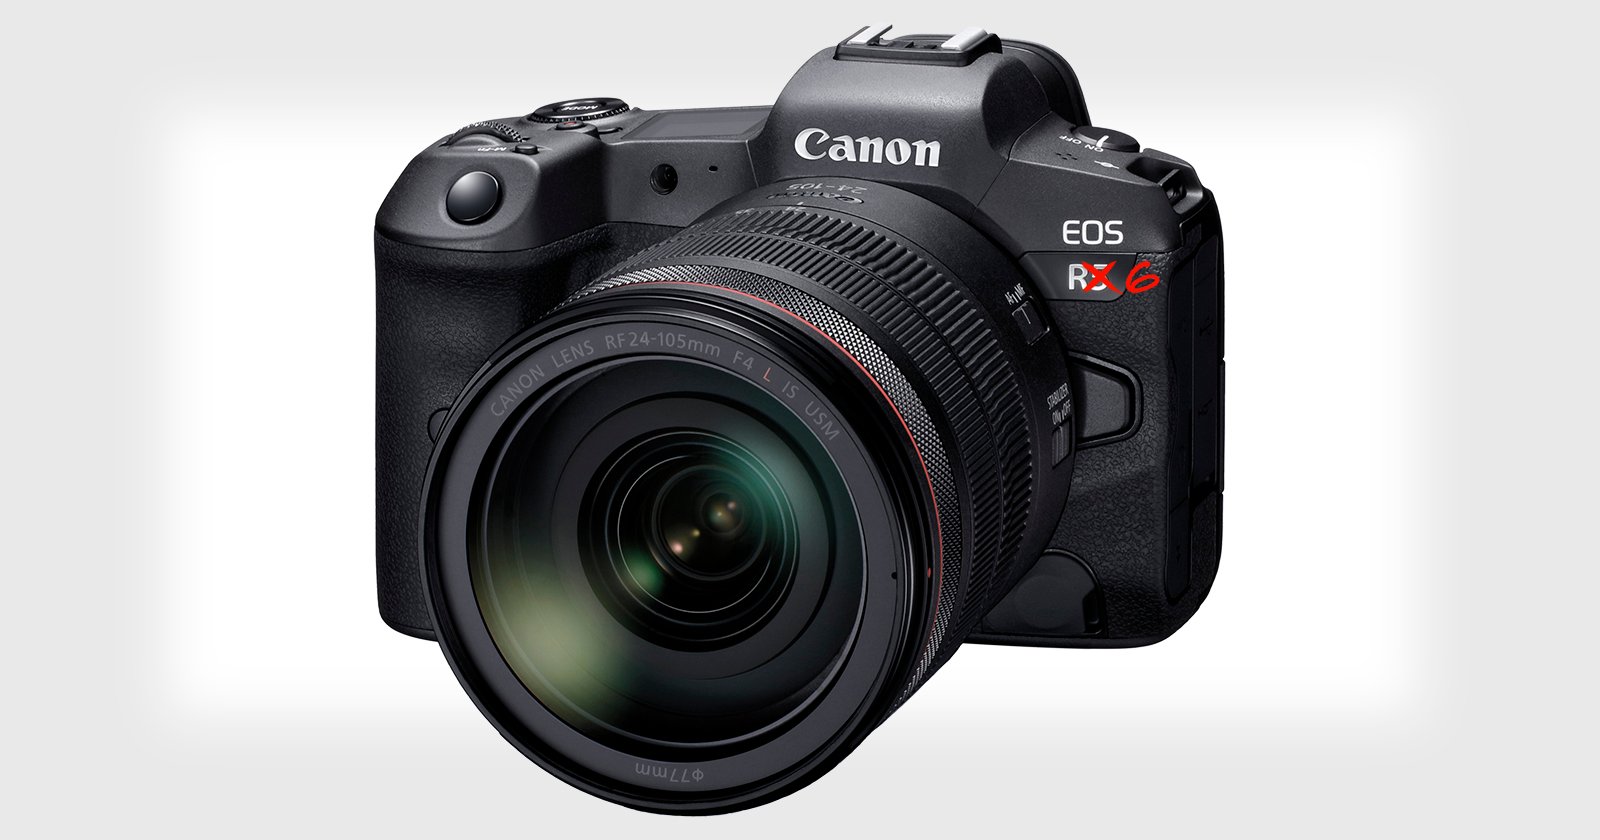 Canon EOS R6 Specs Leaked: Dual Card Slots, 4K/60p Video and More